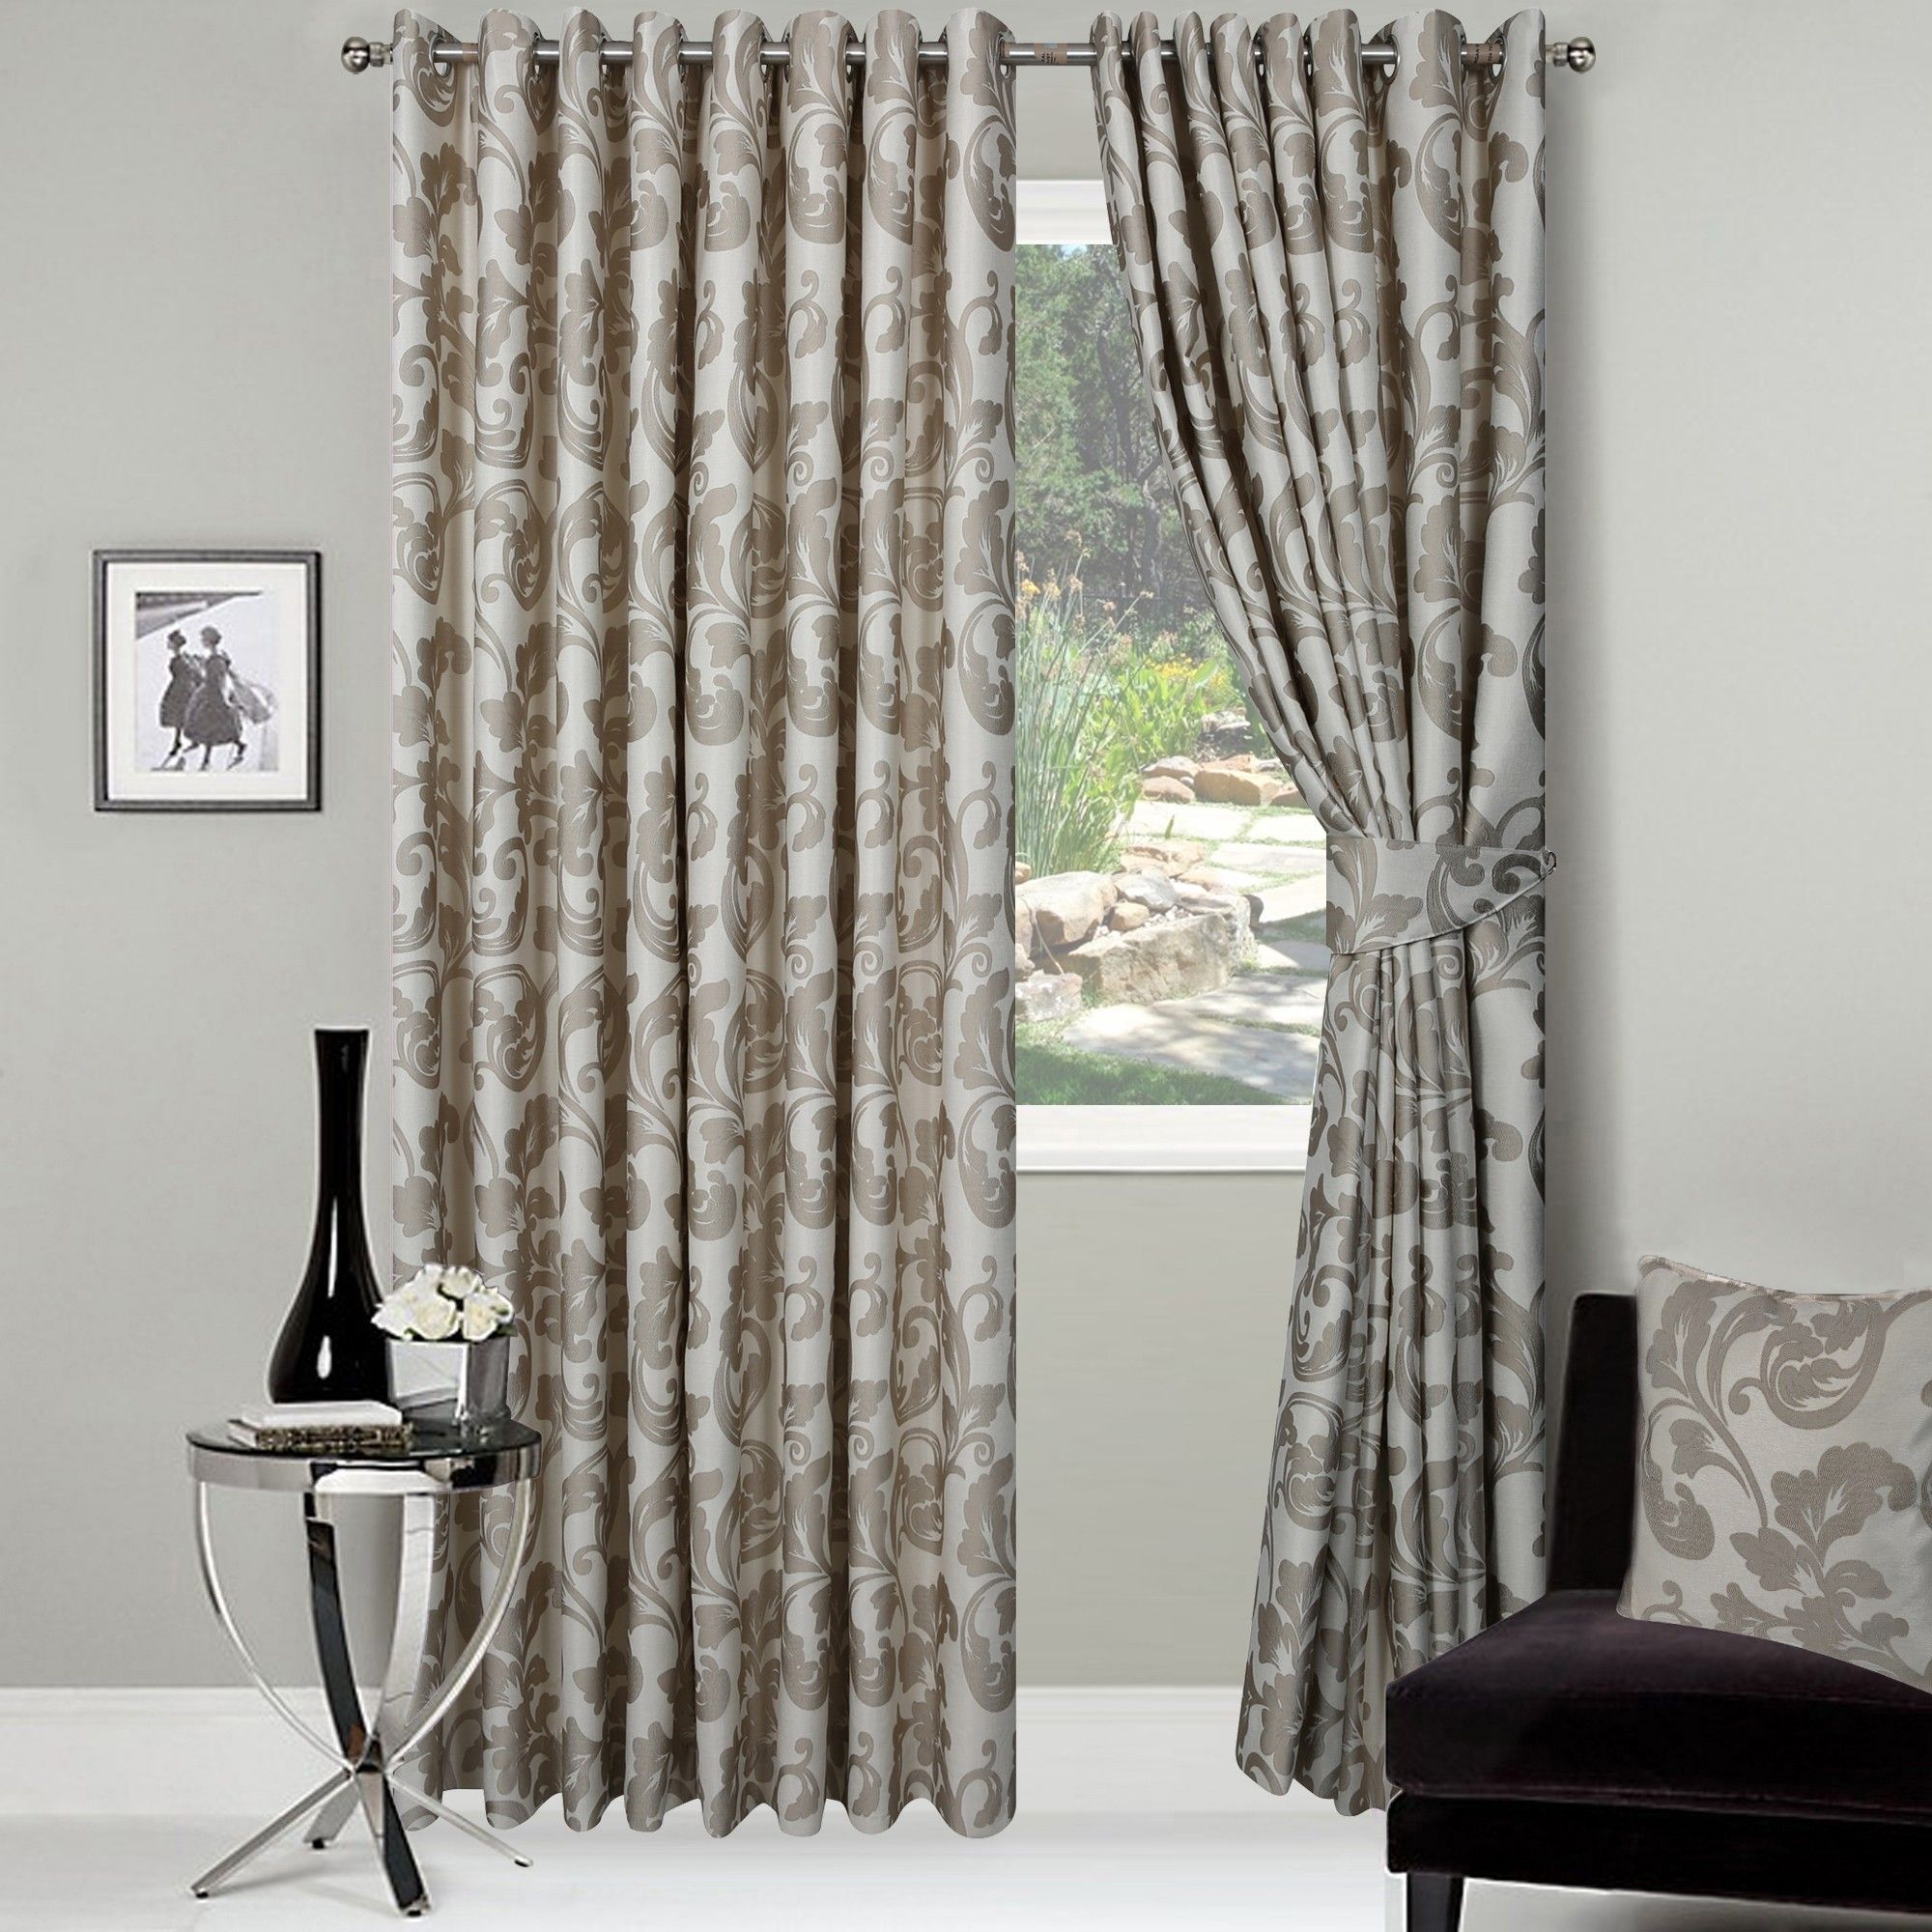 15 Best Ideas Ready Made Curtains for Large Bay Windows ...